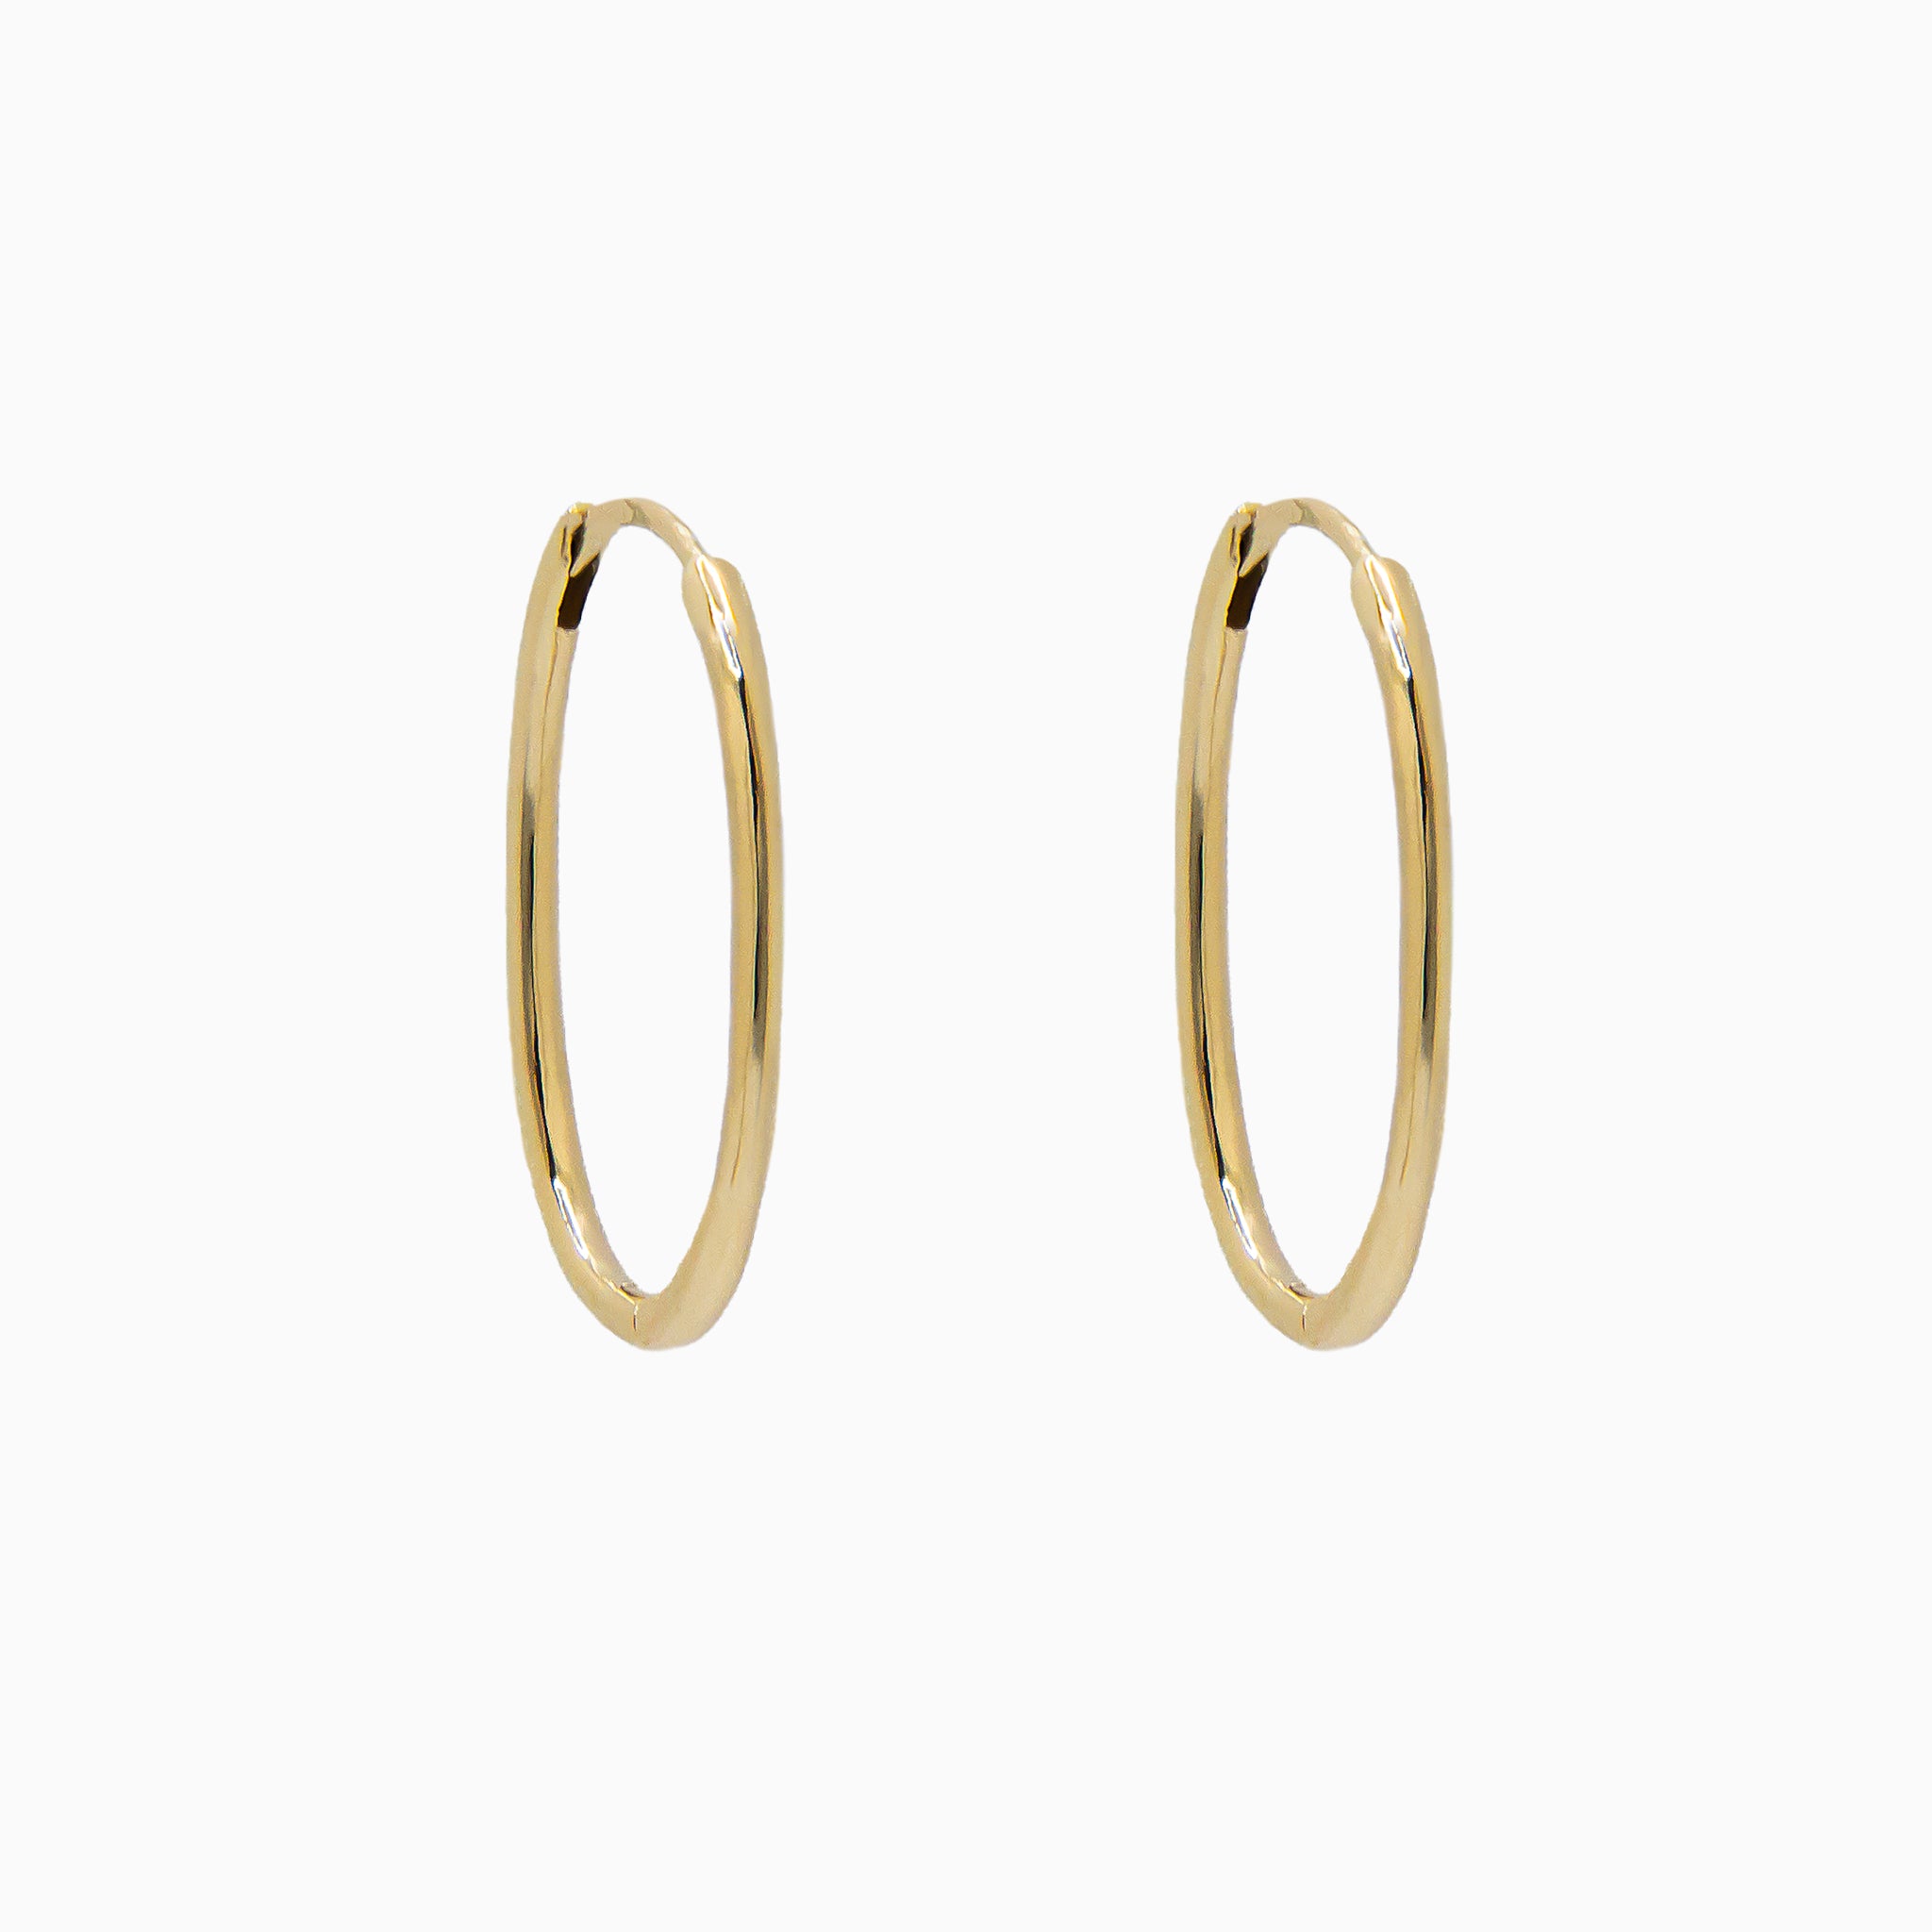 14k Yellow Gold 19mm x 13mm Hinged Everyday Oval Hoop Earrings